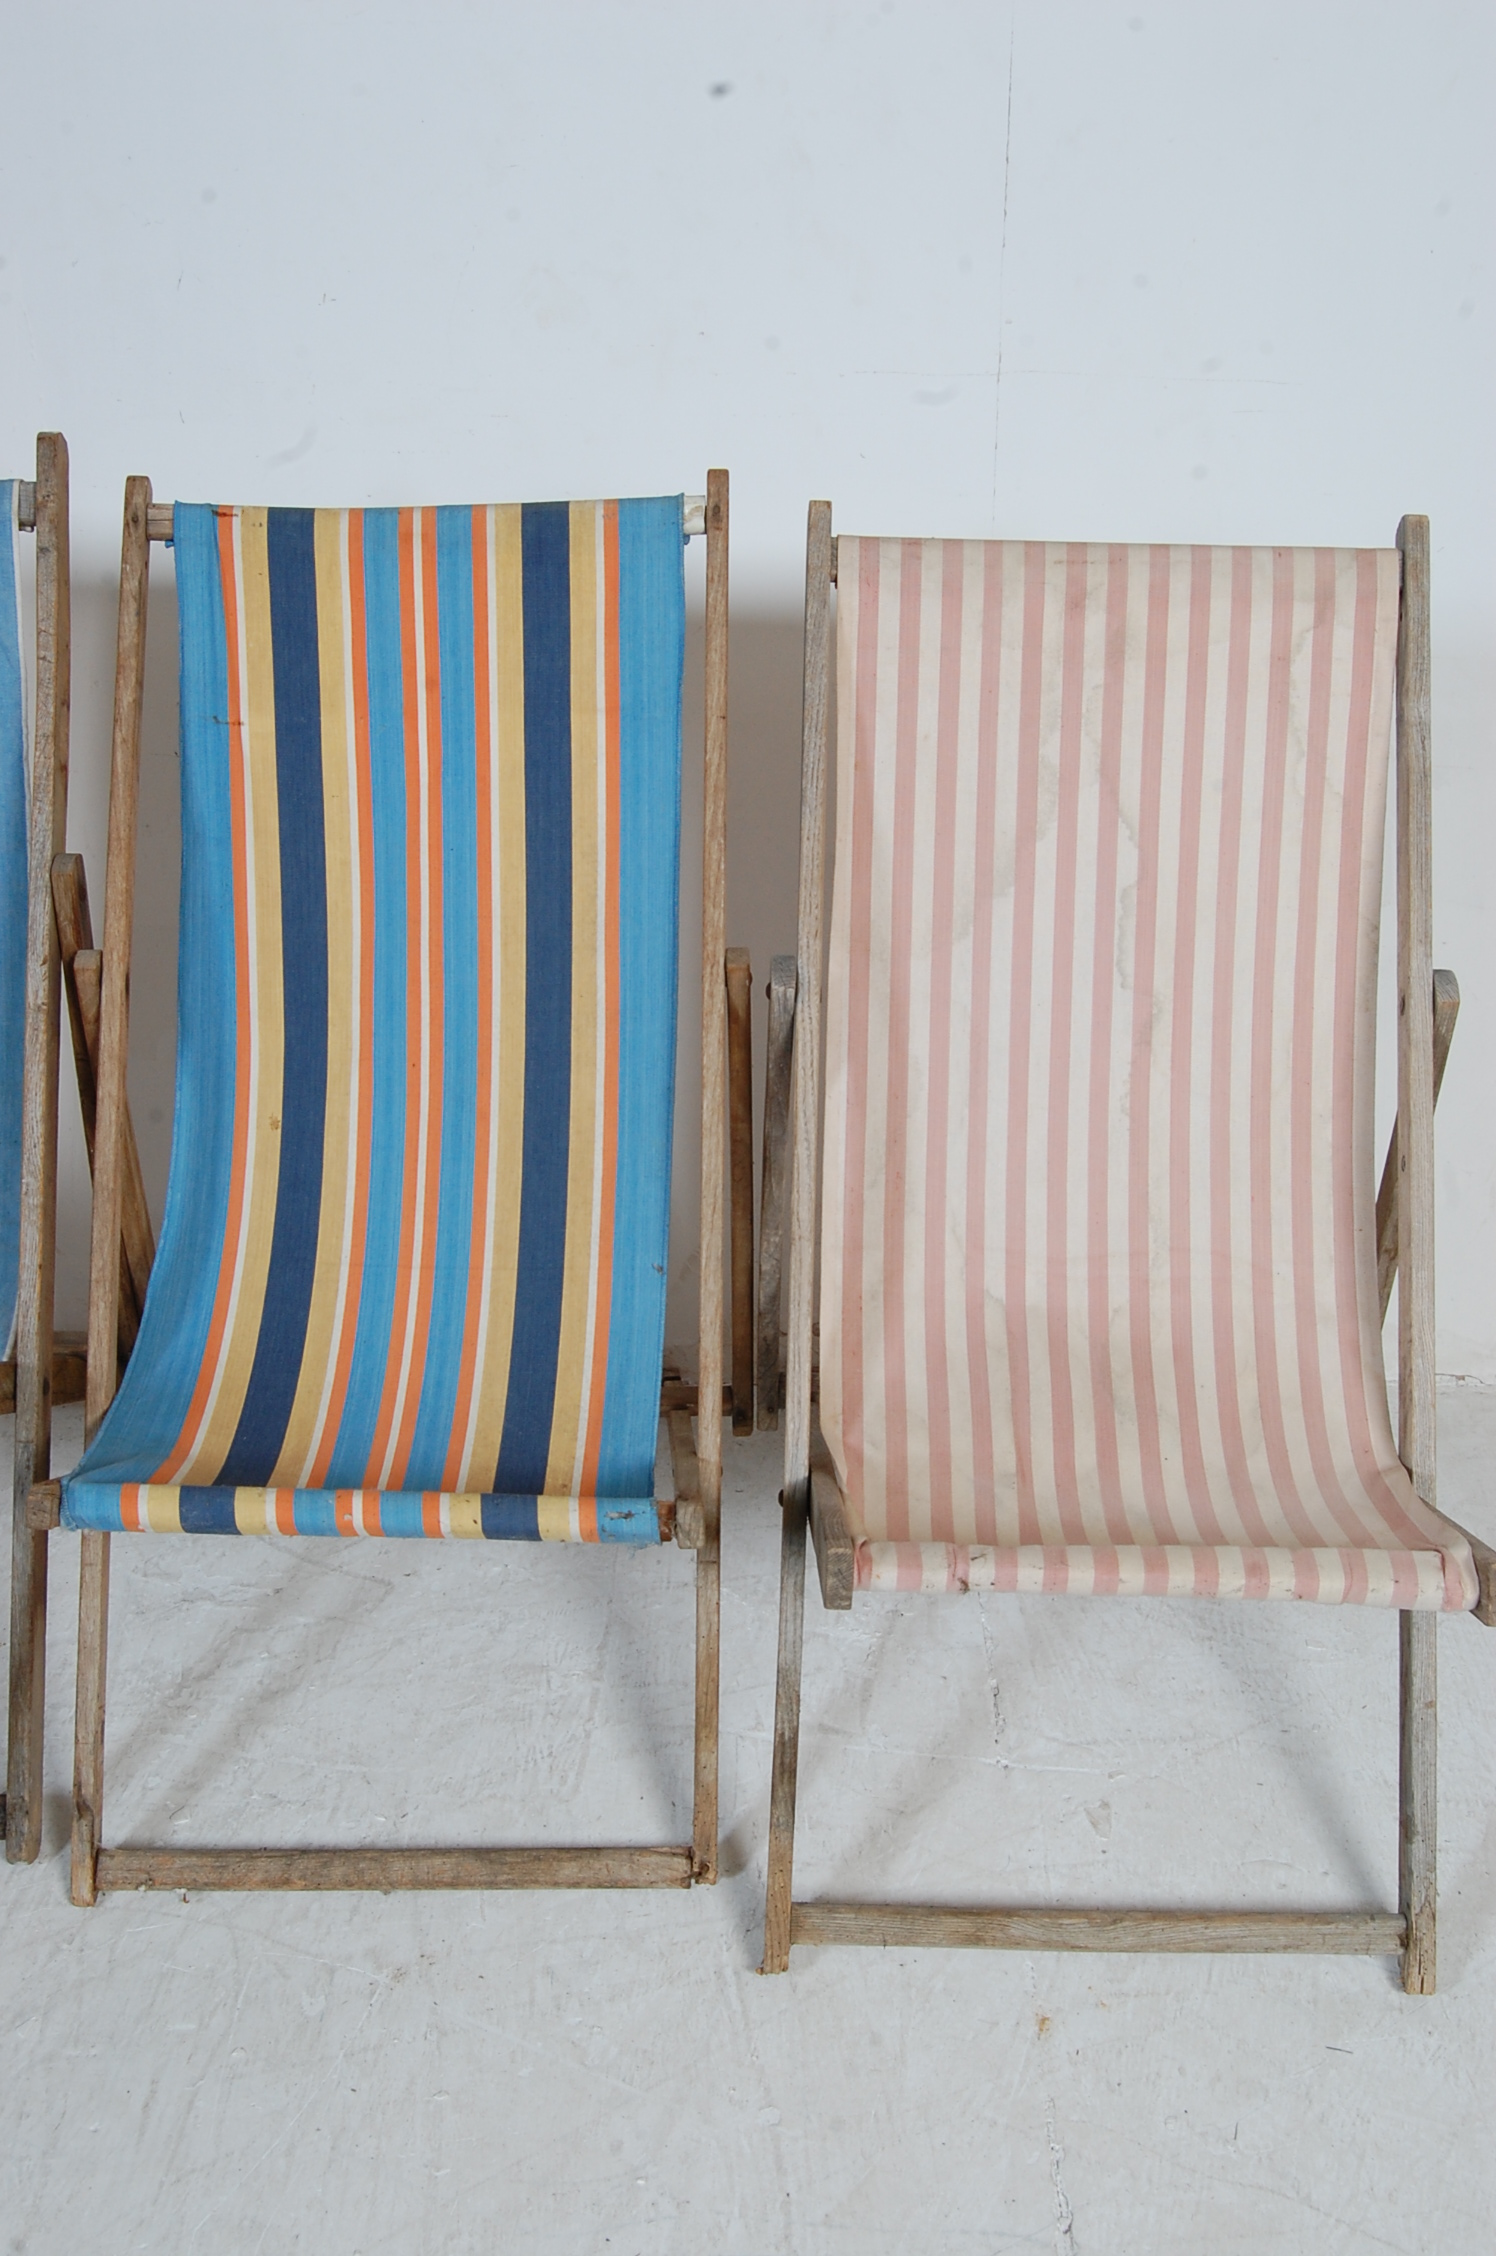 COLLECTION OF FOUR VINTAGE FOLDING DECK CHAIRS - Image 3 of 9